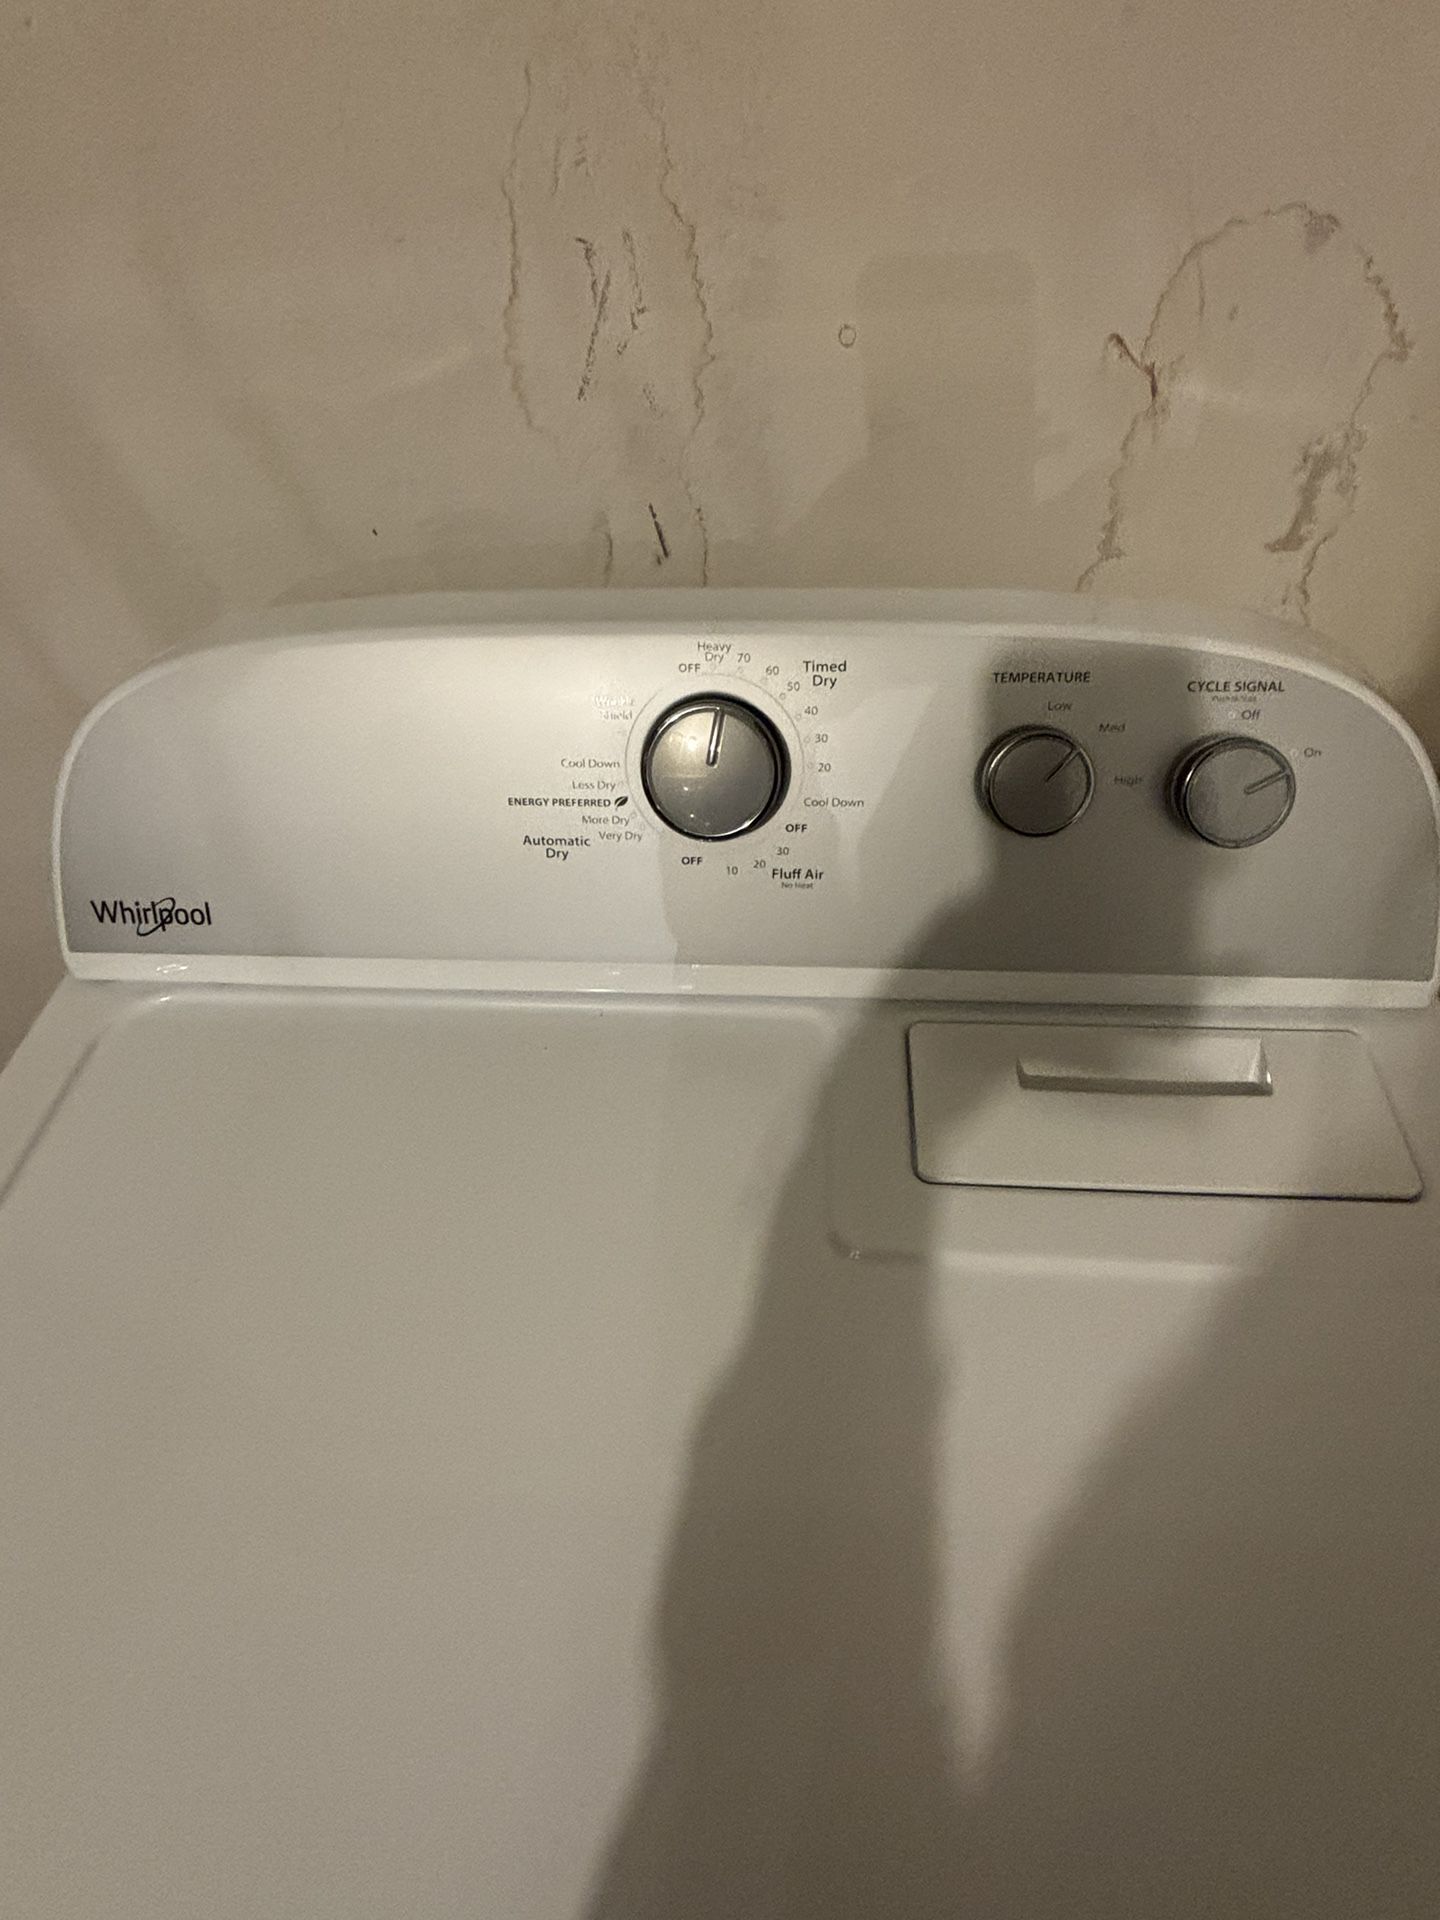 Electric Dryer For Sale Brand New